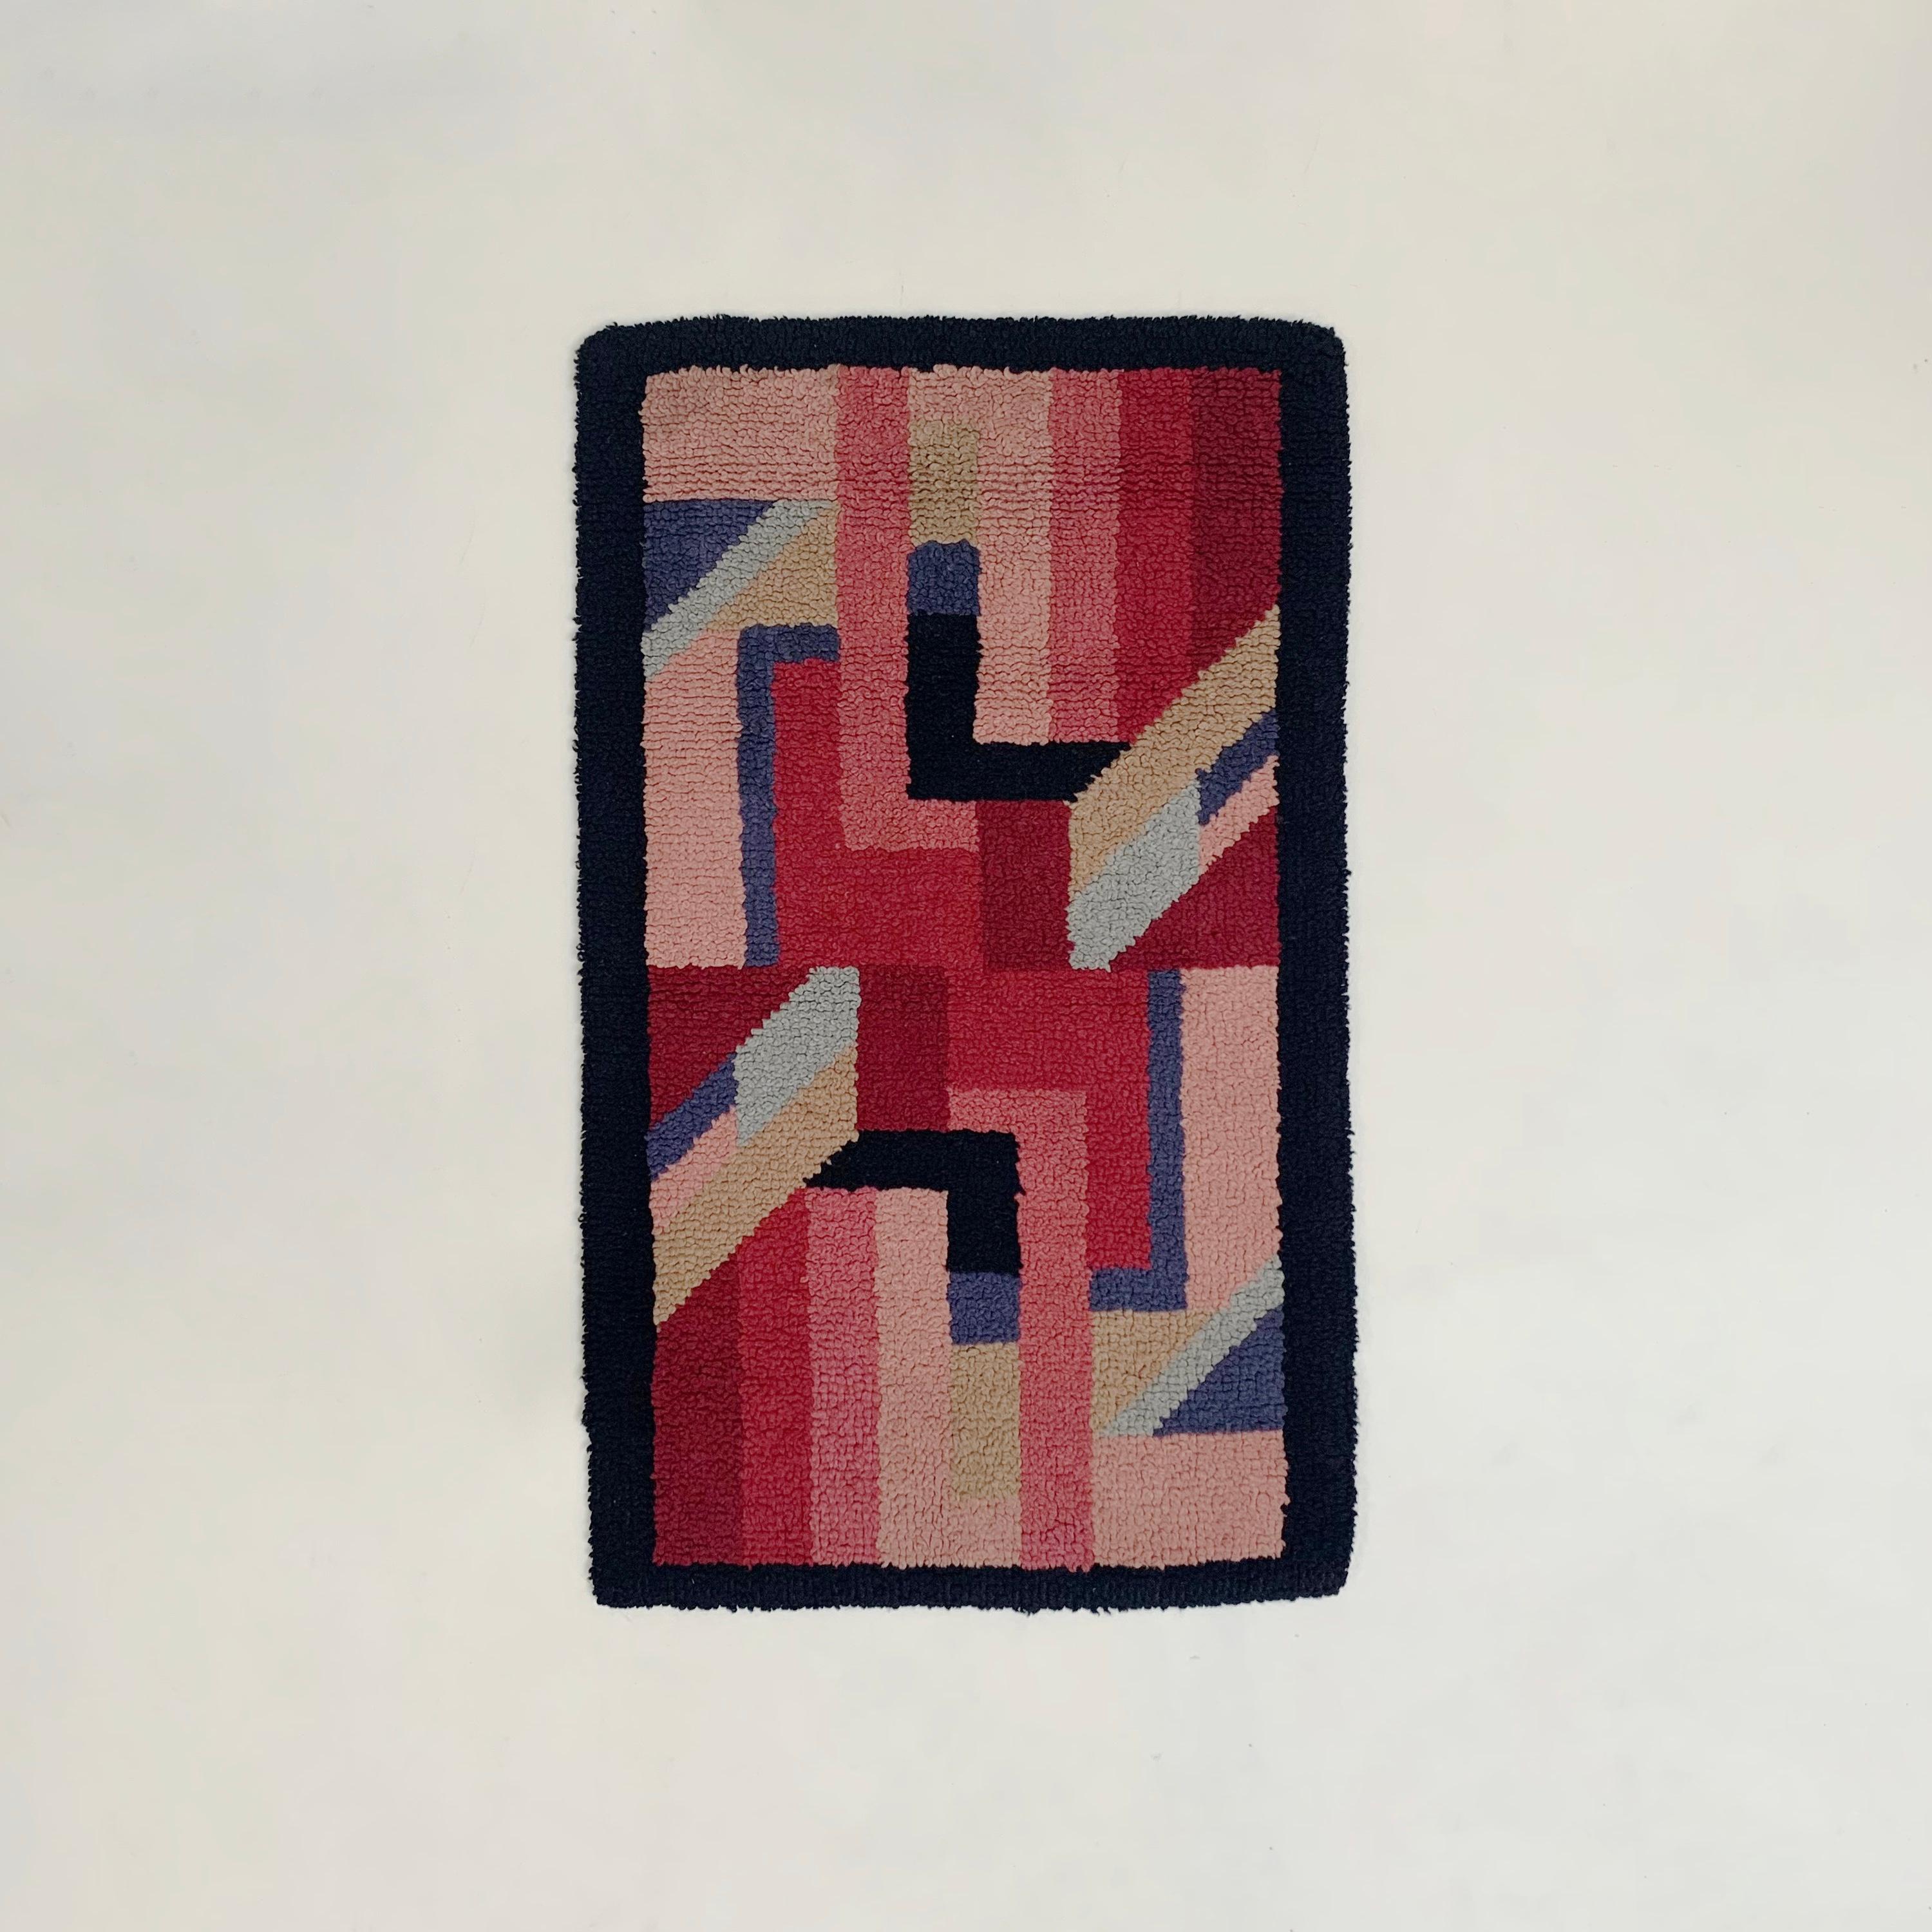 An early 20th century little Art Deco antique rug, circa 1930, France.
Hand-knotted wool.
Symetrical and geometric lines and patterns in luminous shades of pink, red, blue, beige and black.
Size easy to hang on the wall.
Dimensions: 110 cm W, 65